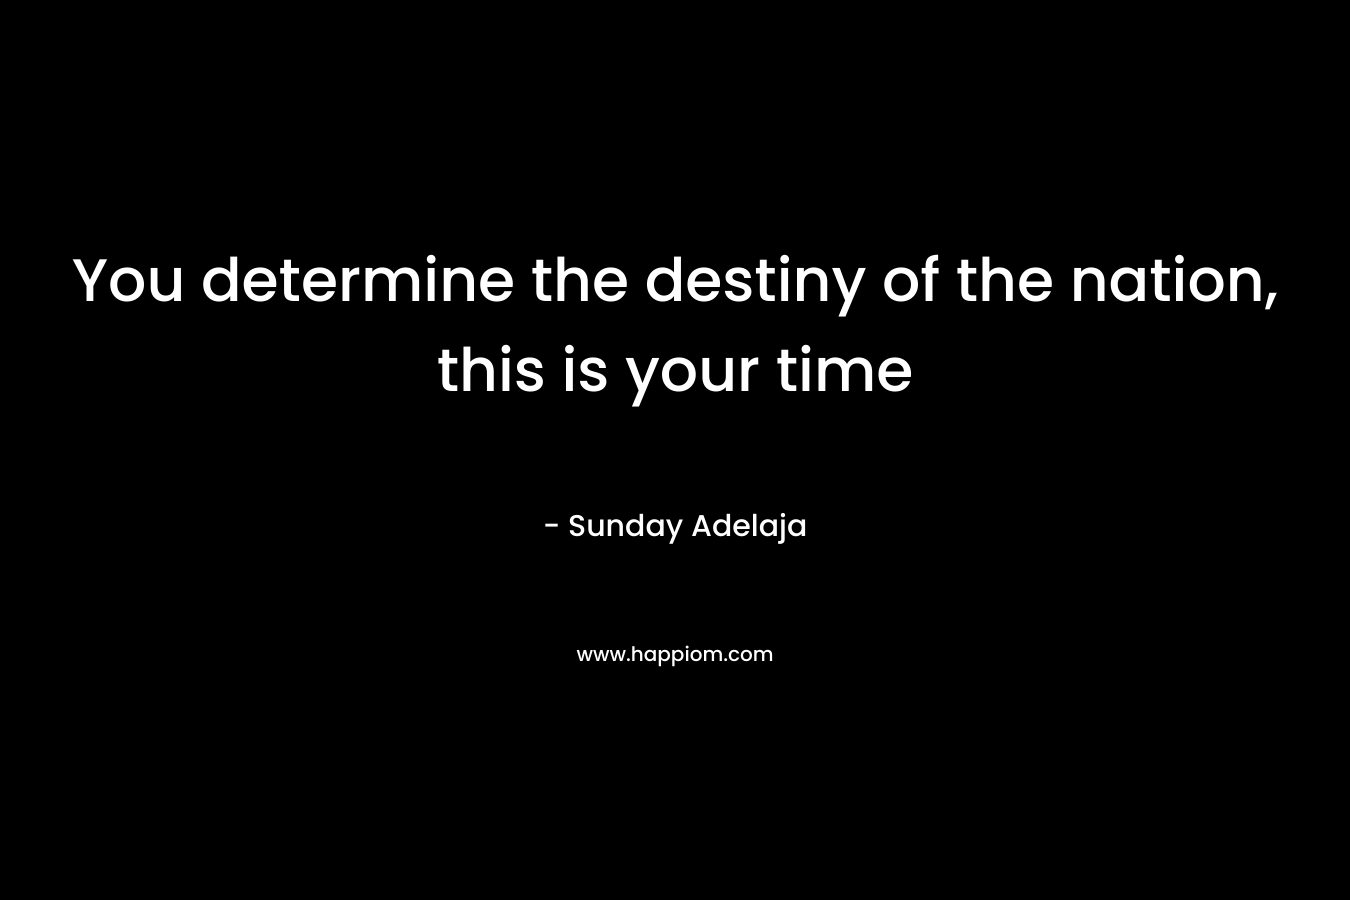 You determine the destiny of the nation, this is your time